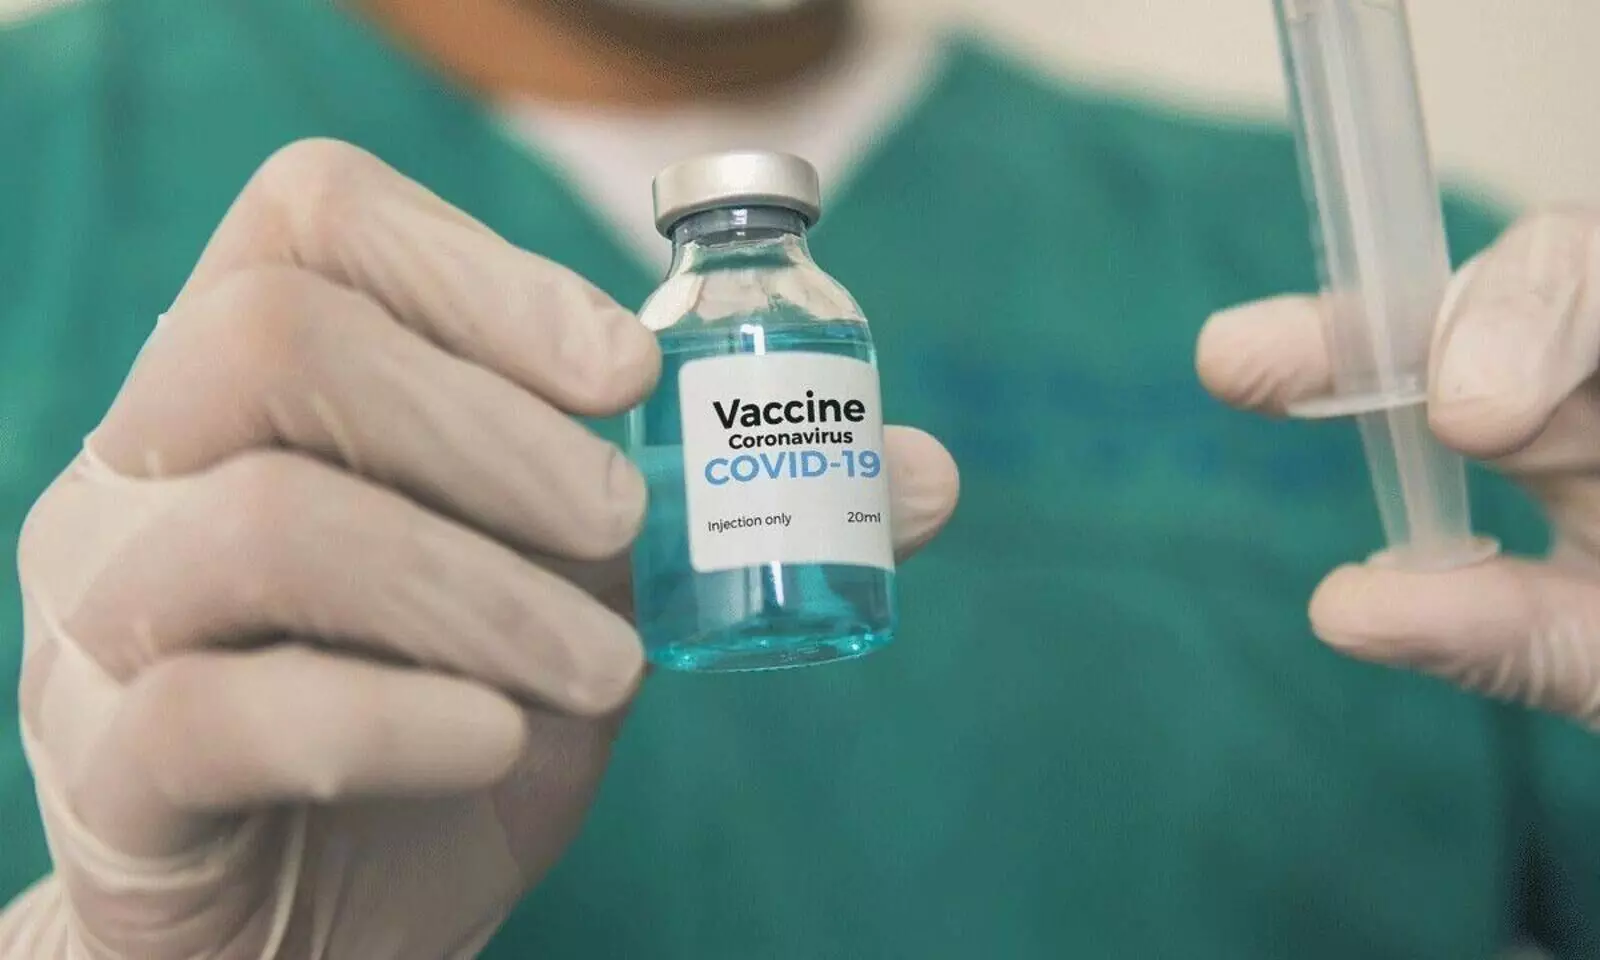 WHO approves Pfizer Covid-19 vaccine for emergency use